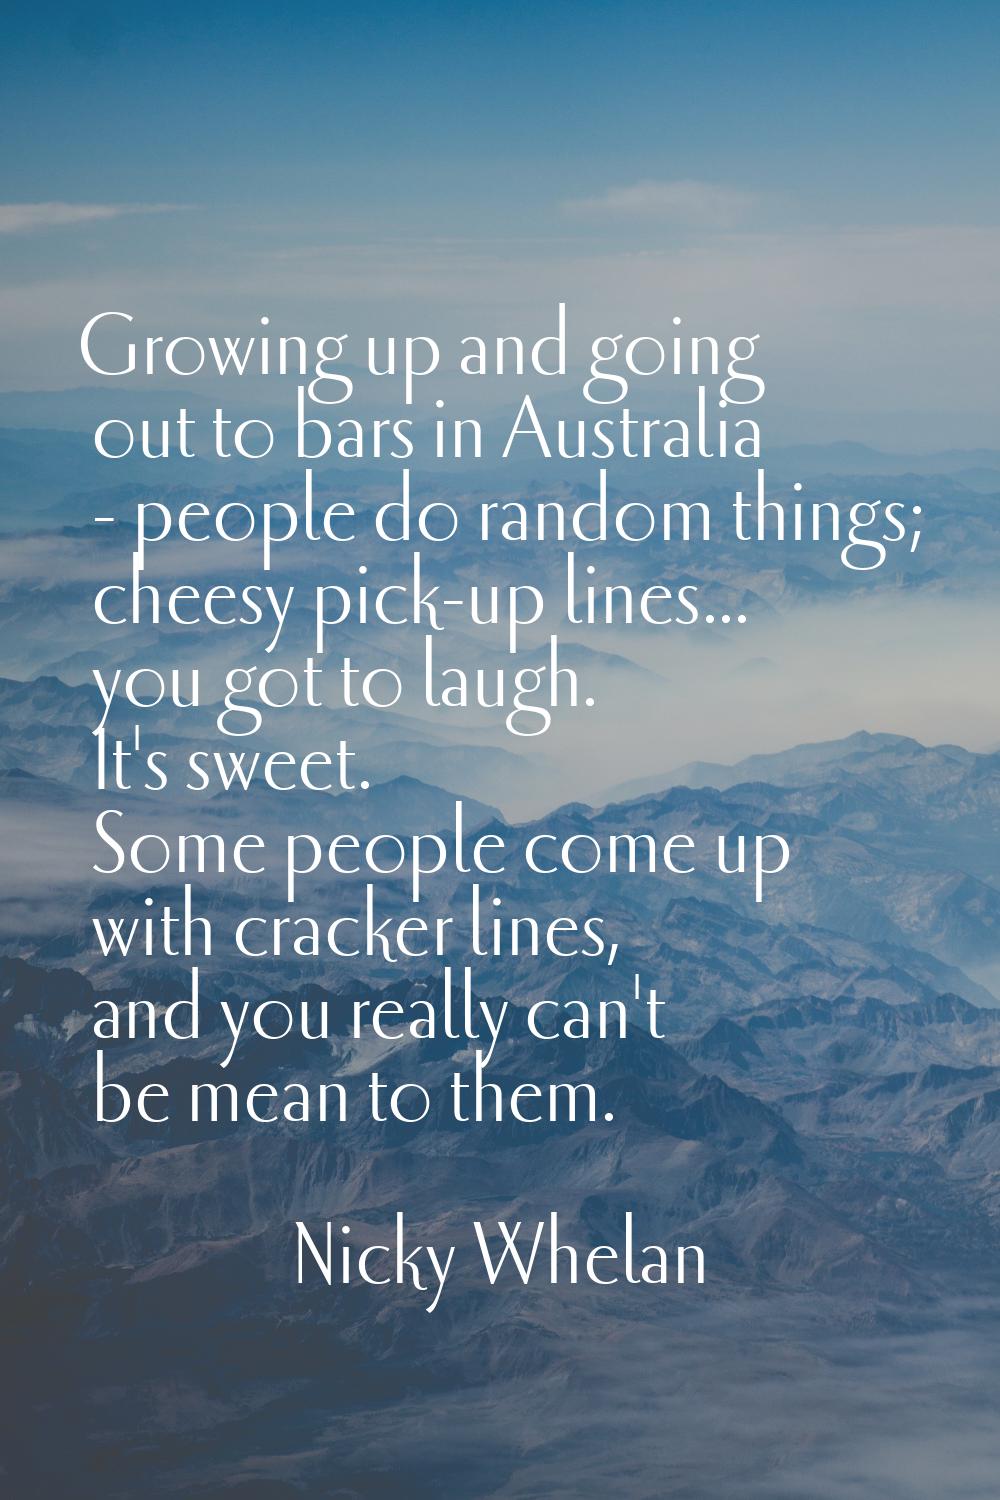 Growing up and going out to bars in Australia - people do random things; cheesy pick-up lines... yo